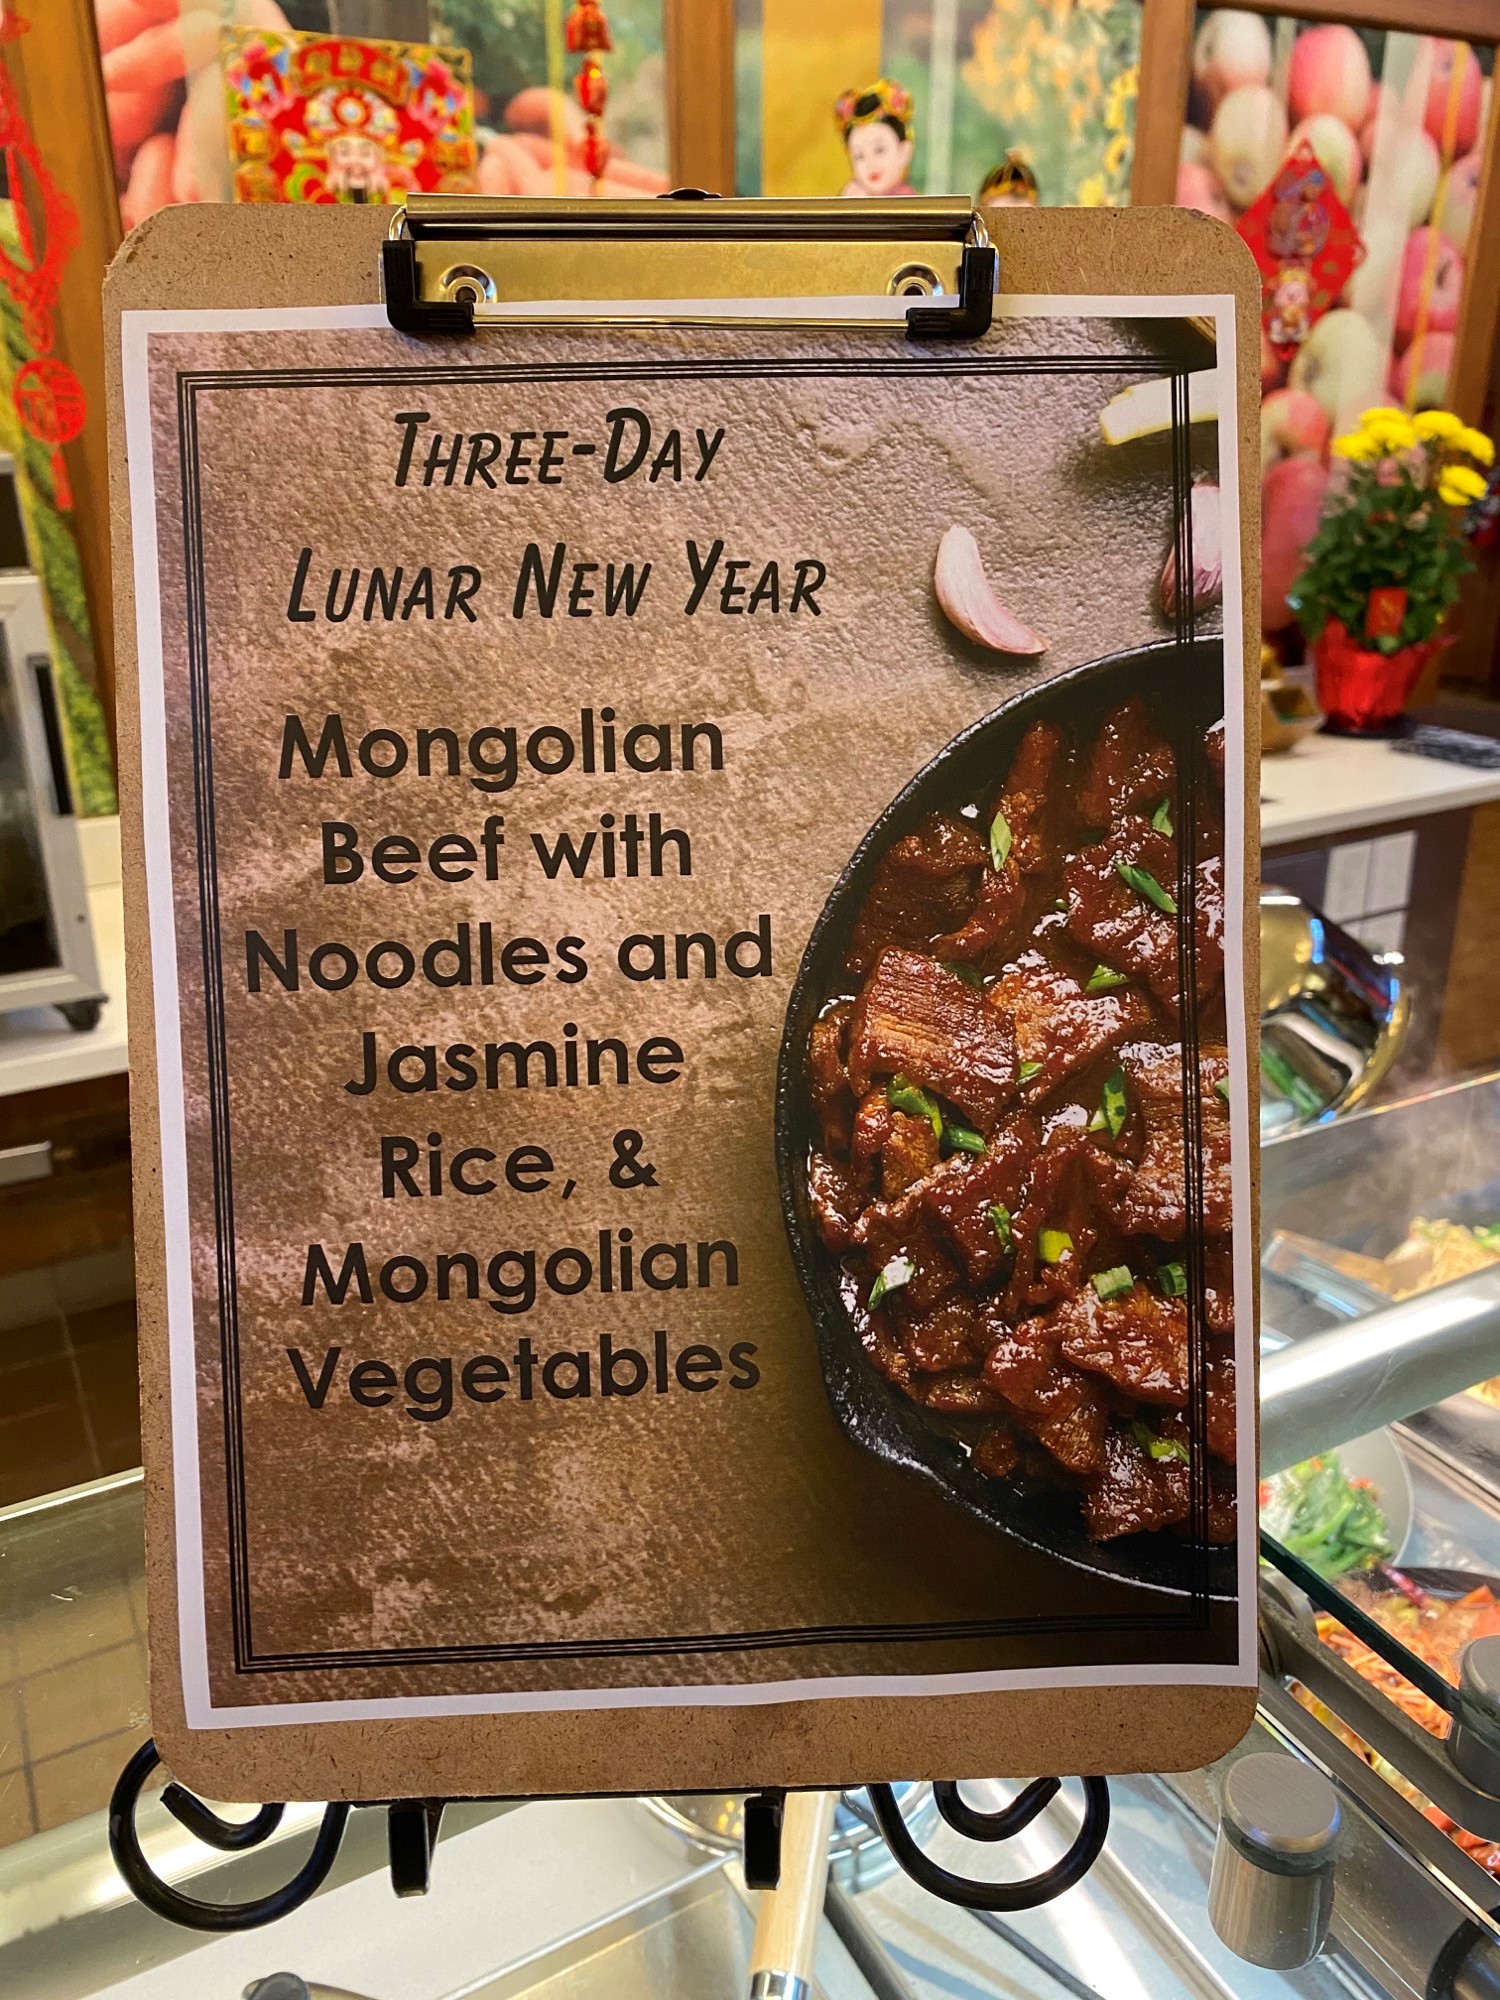 <span  class="uc_style_uc_tiles_grid_image_elementor_uc_items_attribute_title" style="color:#ffffff;">Lunar New Year</span>